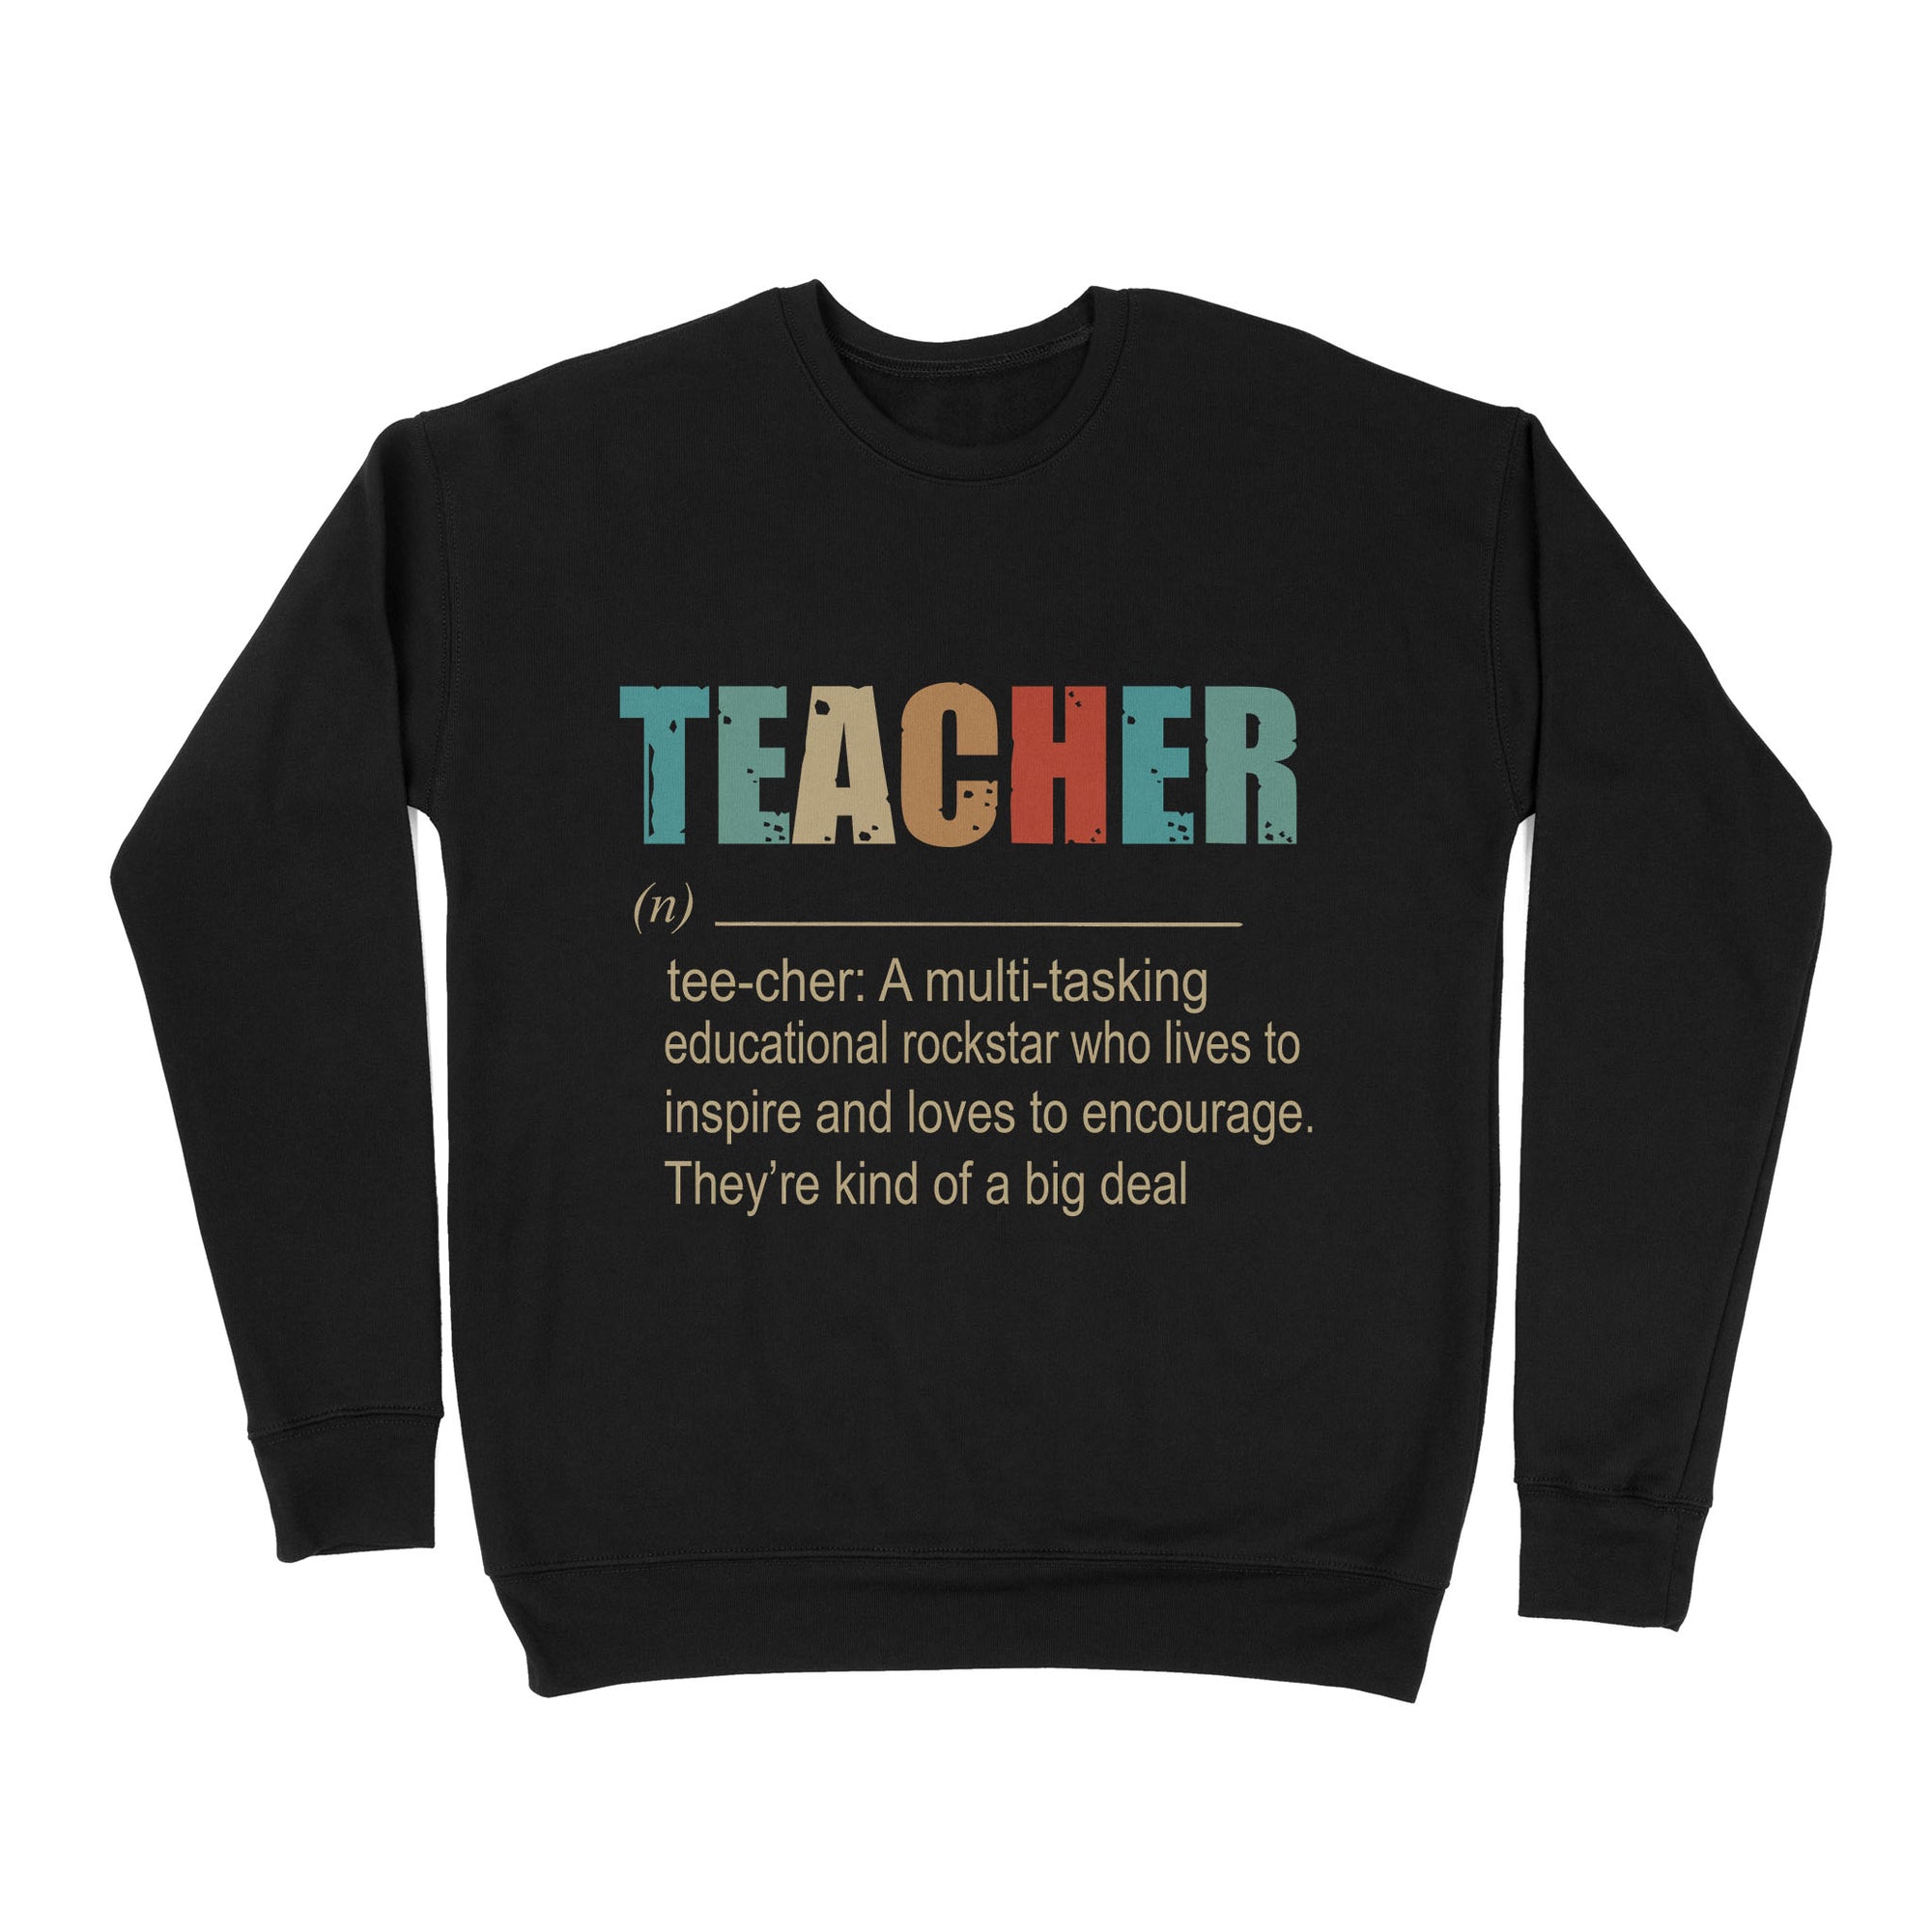 Premium Crew Neck Sweatshirt - Teacher A Multitasking Educational Rockstar Who Lives To Inspire Ang Loves To Encourage They’re Kind Of A Big Deal